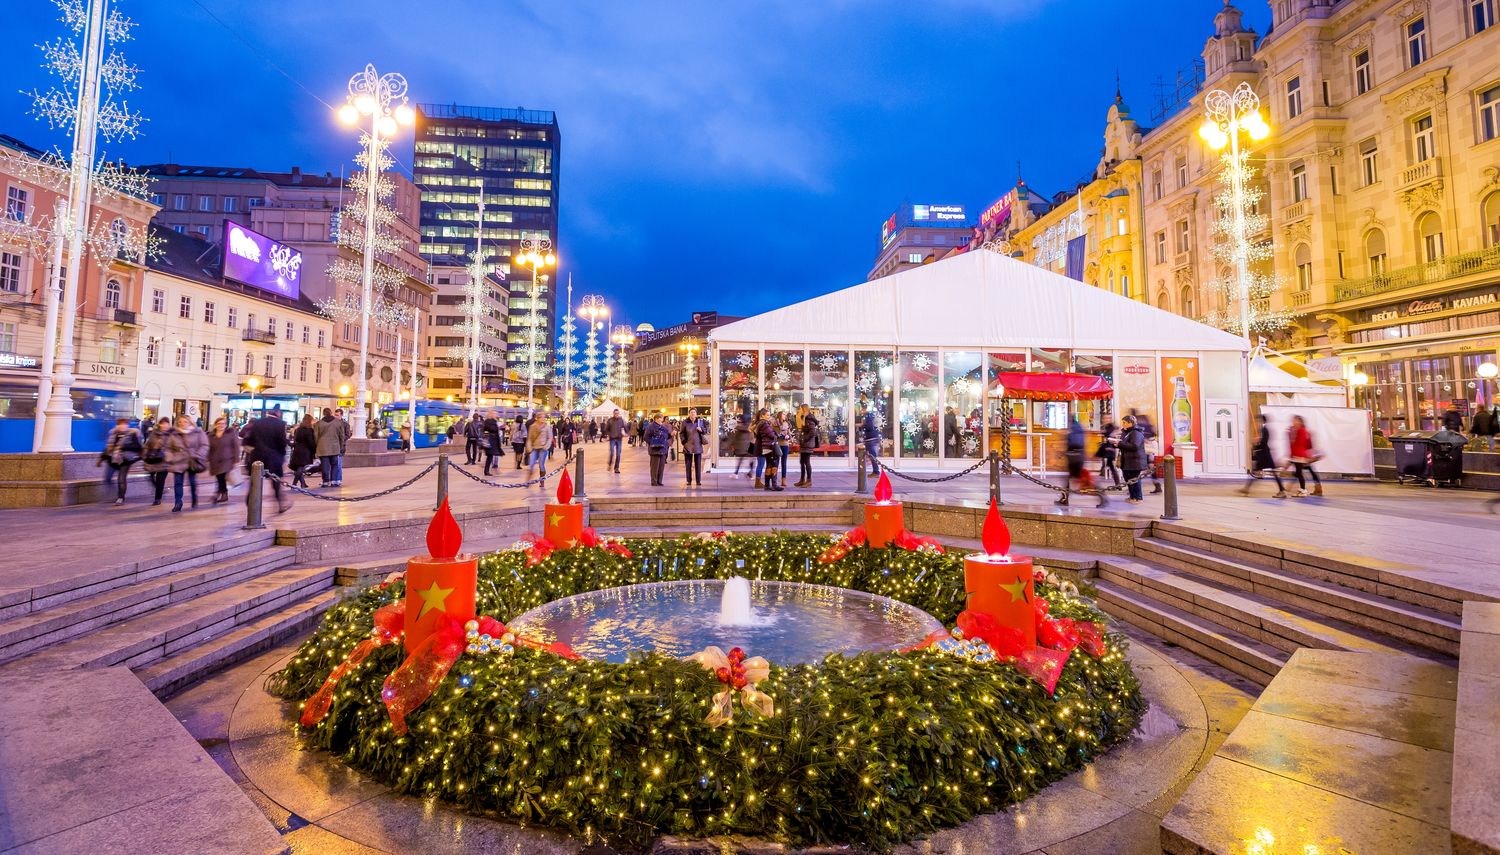 7 Things Not to Miss at Europe’s Best Christmas Market – Advent in Zagreb